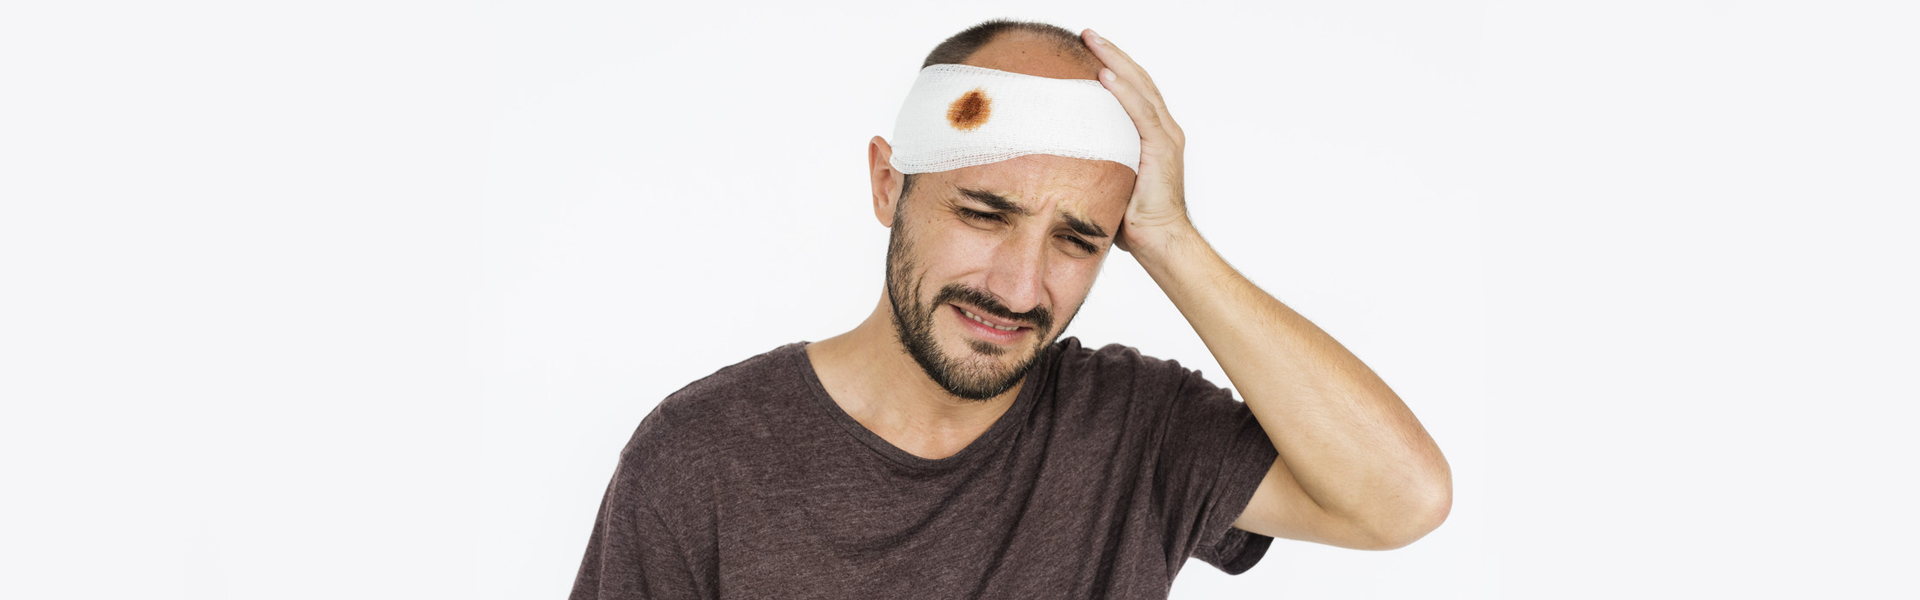 Head Injury: Causes, Symptoms, and Treatment